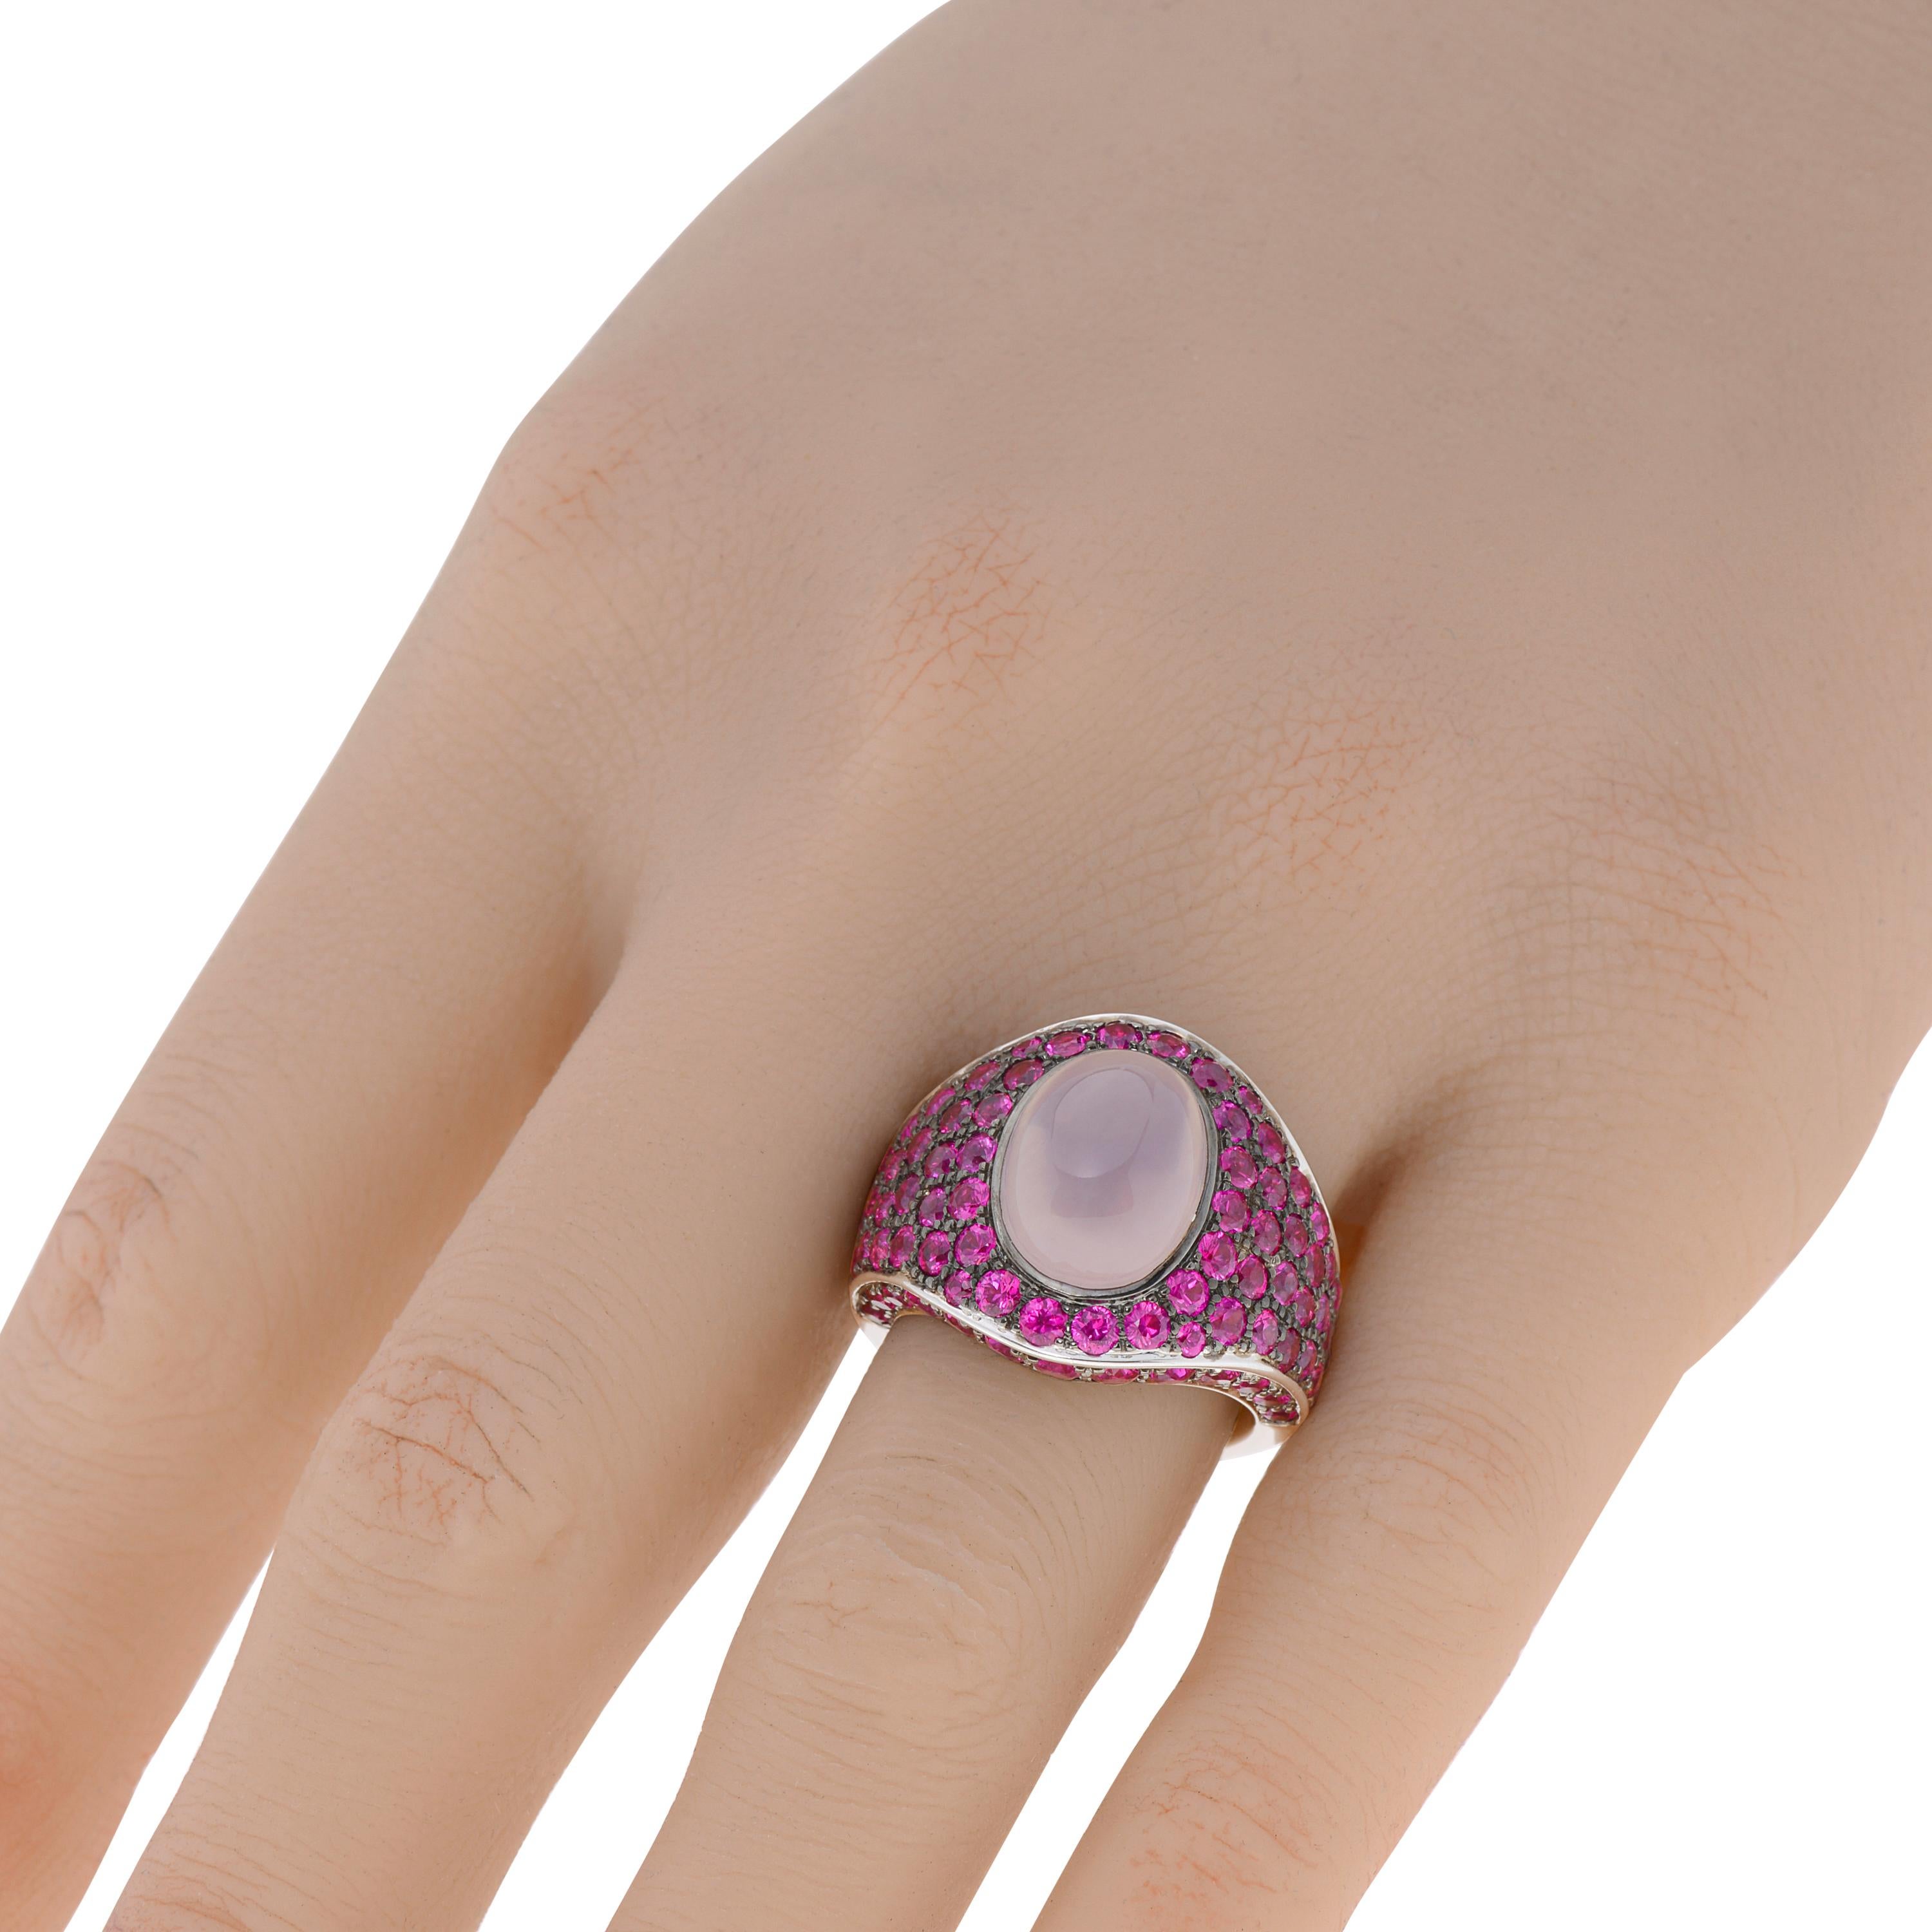 This bejeweled Roberto Coin 18K White Gold Cocktail Ring features a 5.50ct. cabochon pink quartz in perfect harmony with 5.05ct. tw. round cut rubies. The ring size is 7 (54.4). The decoration size is 10mm x 13mm. The weight is 143g.
